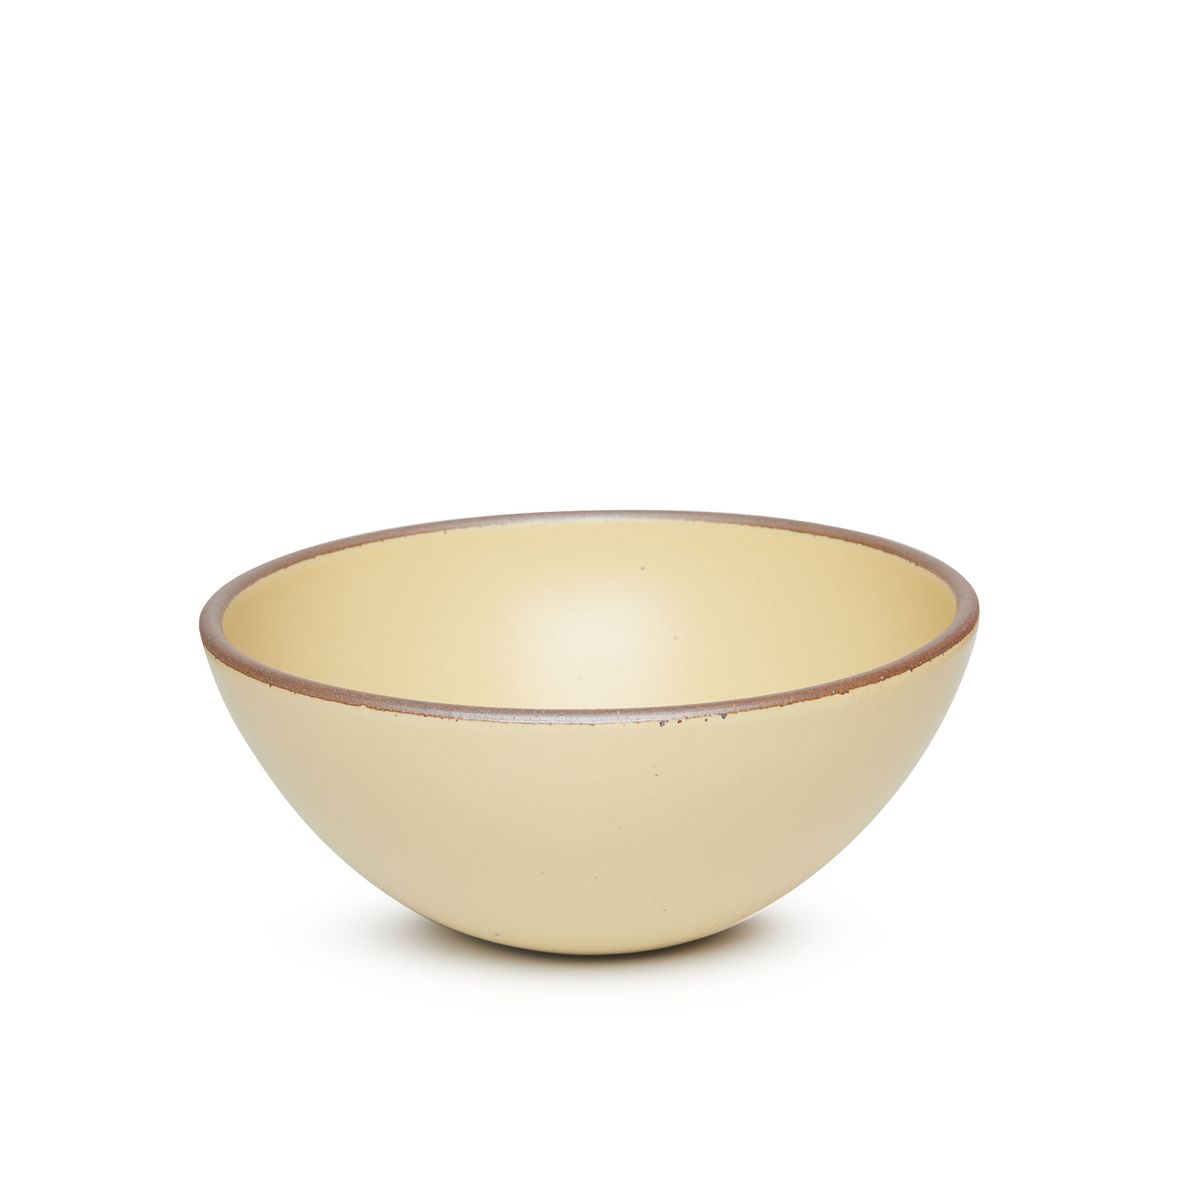 A large rounded ceramic bowl in a light butter yellow color featuring iron speckles and an unglazed rim